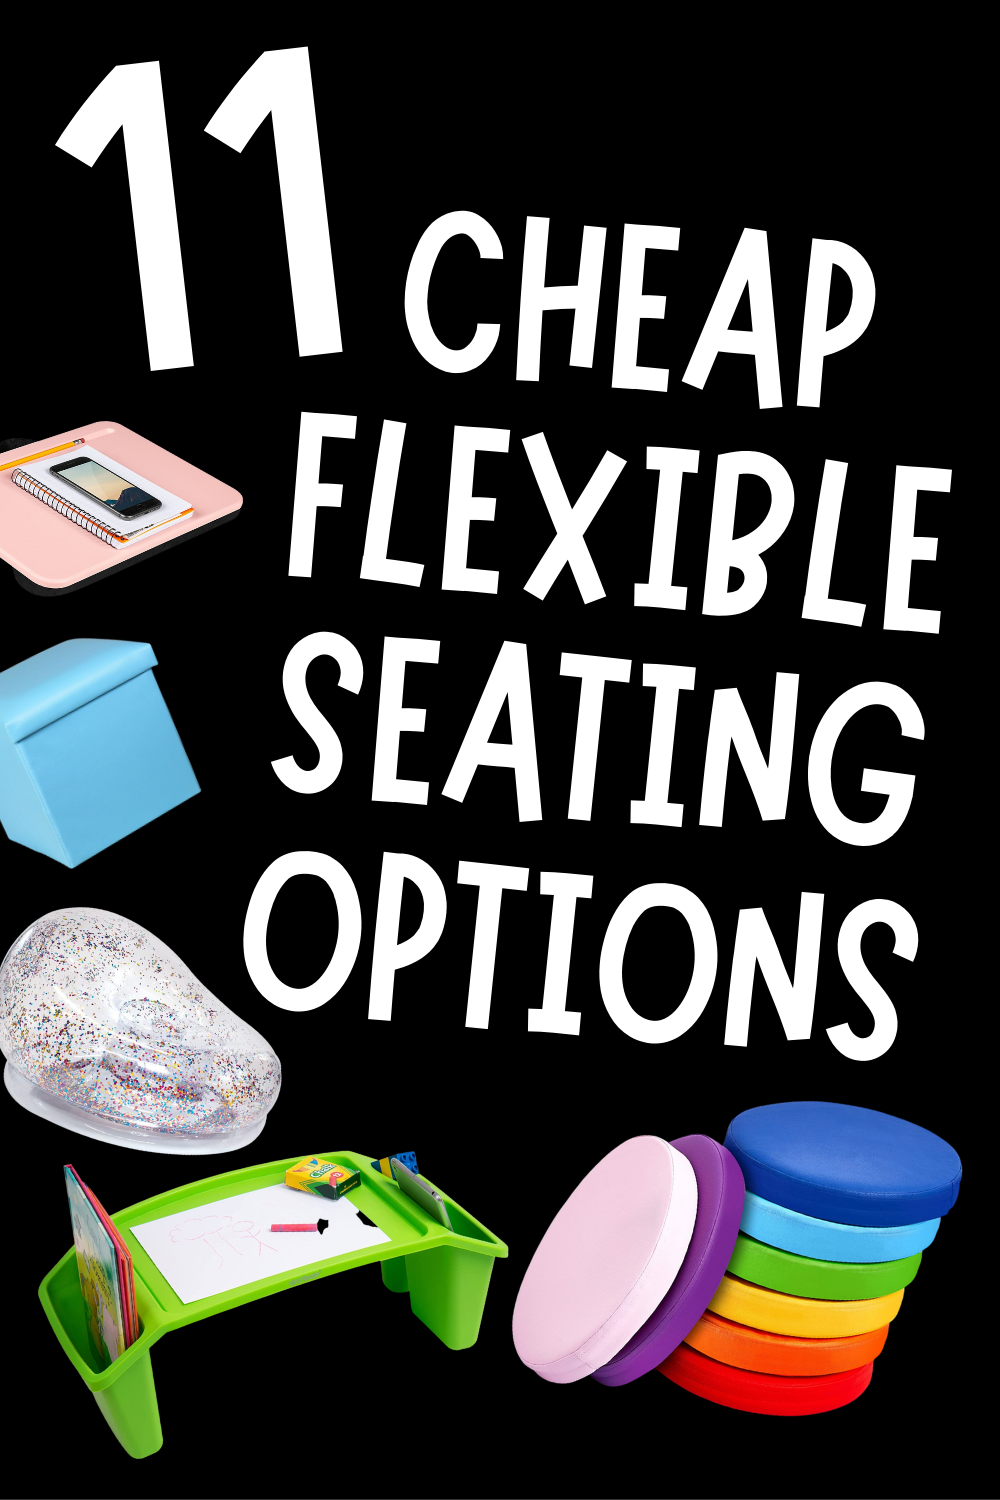 11 Cheap Flexible Seating Options